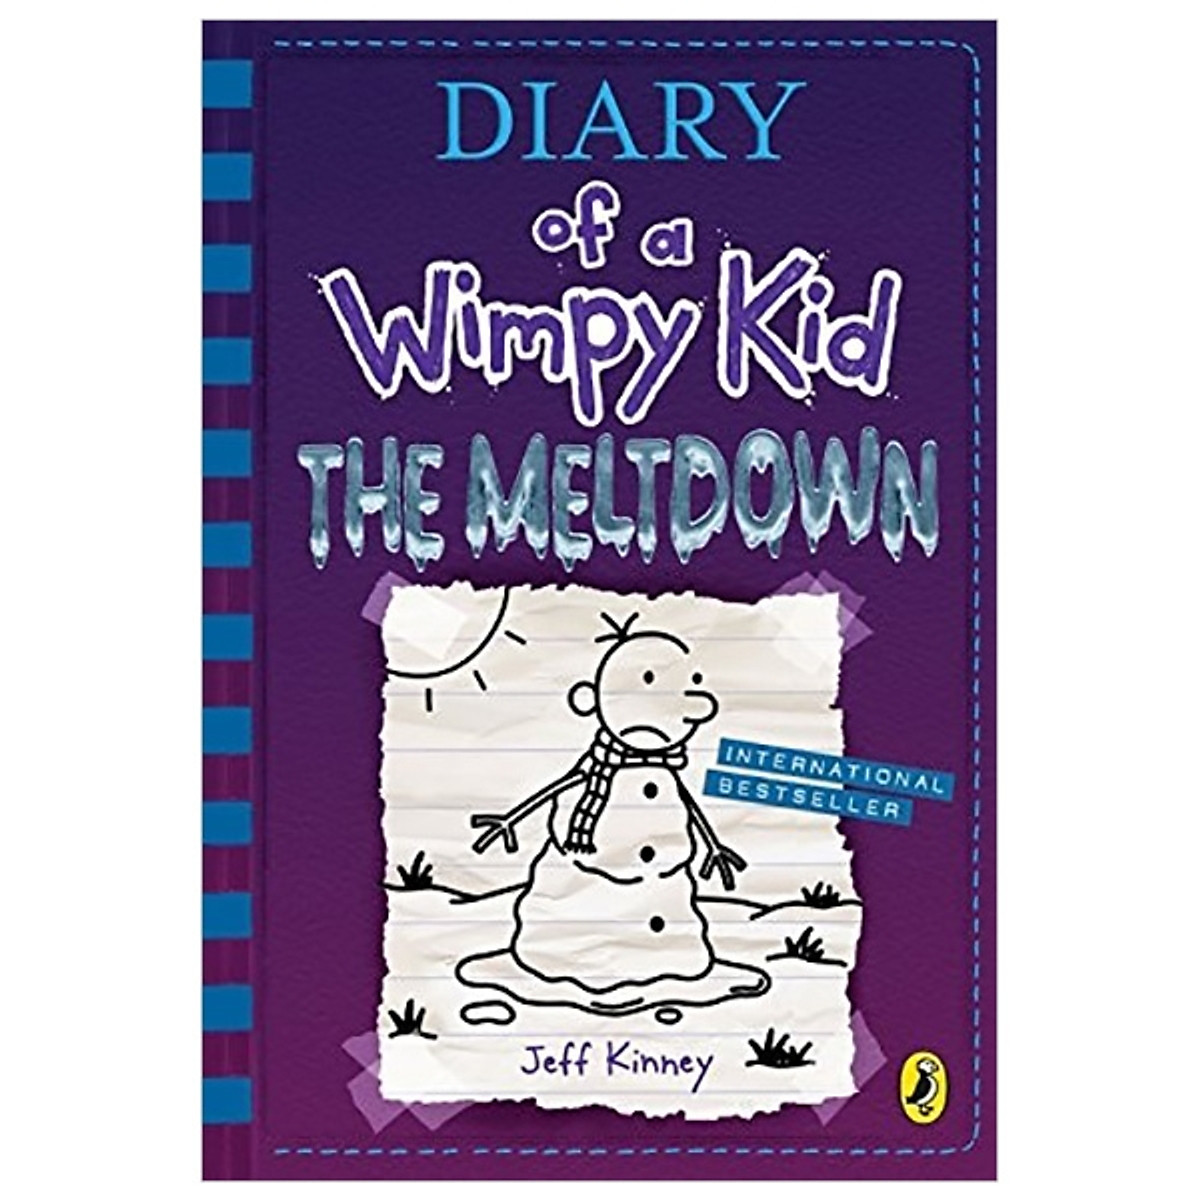 Diary of a Wimpy Kid: The Meltdown (Book 13) Hardback